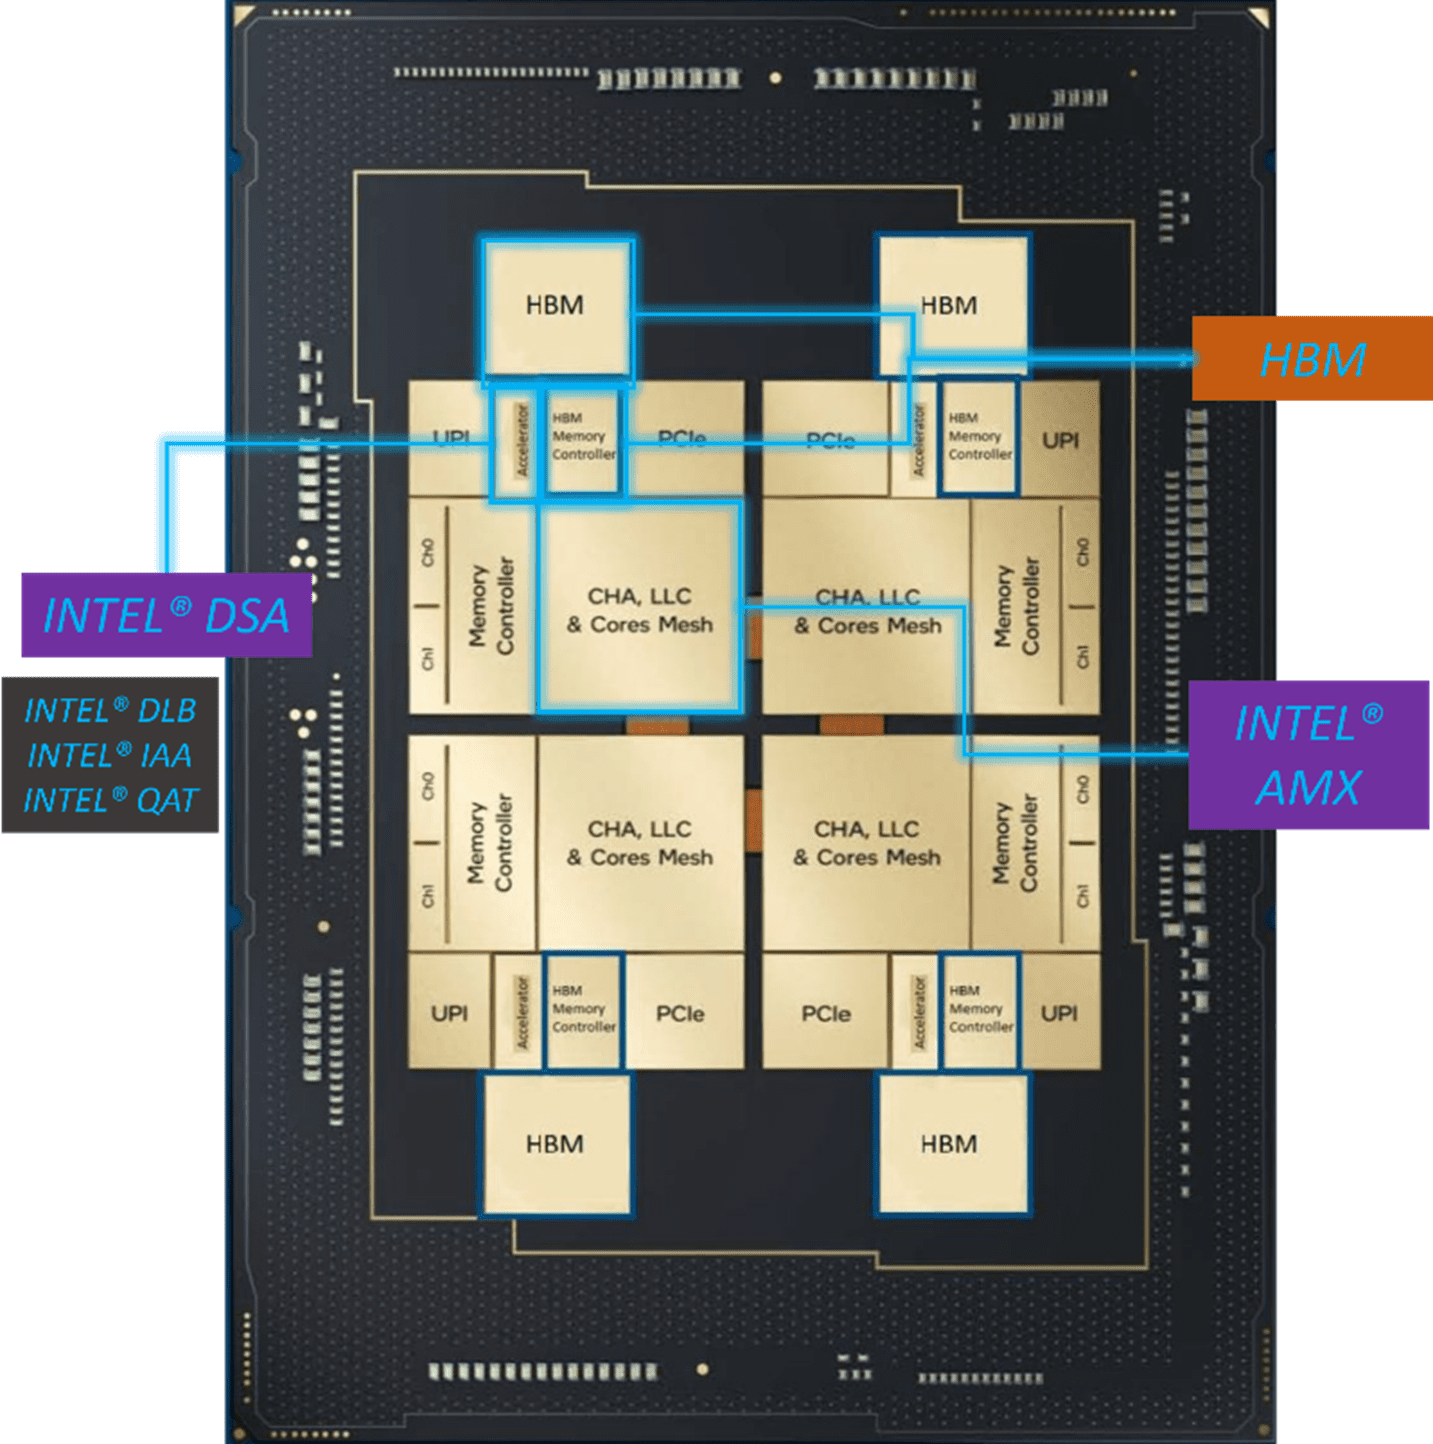 Internal CPU Accelerators and HBM Enable Faster and Smarter HPC